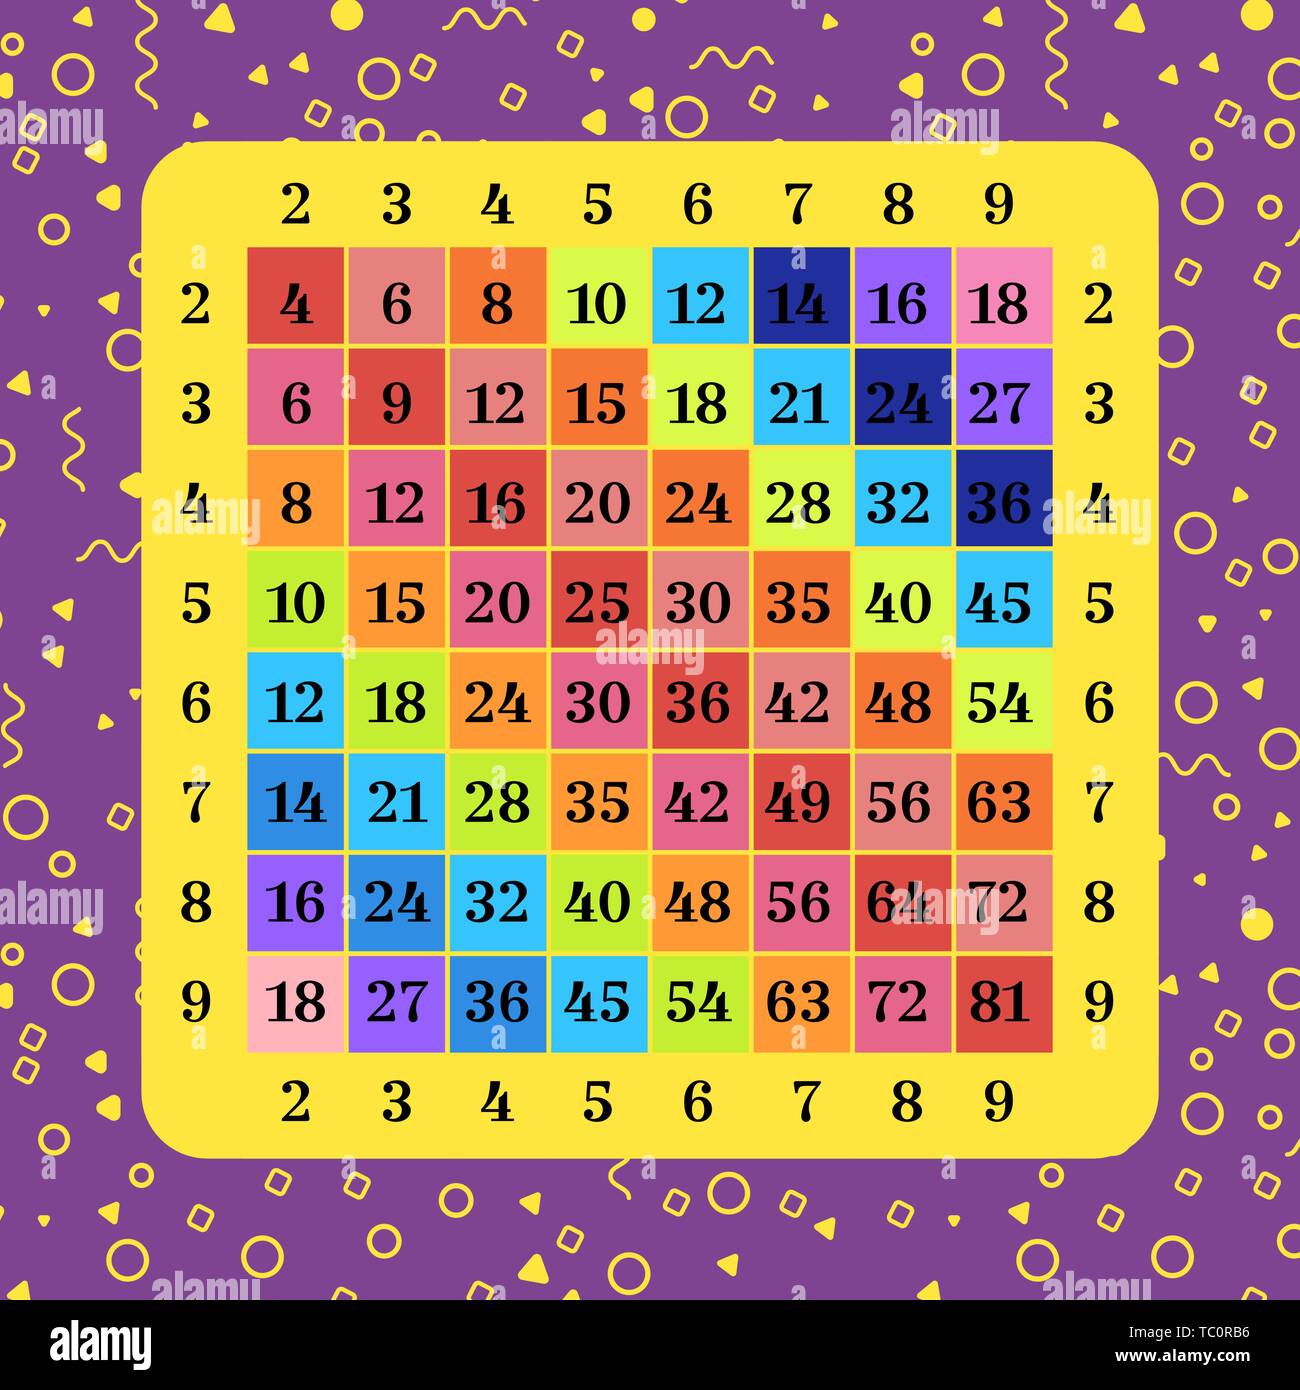 Multiplication Table Poster for Kids - Educational Times Table Chart for  Math C